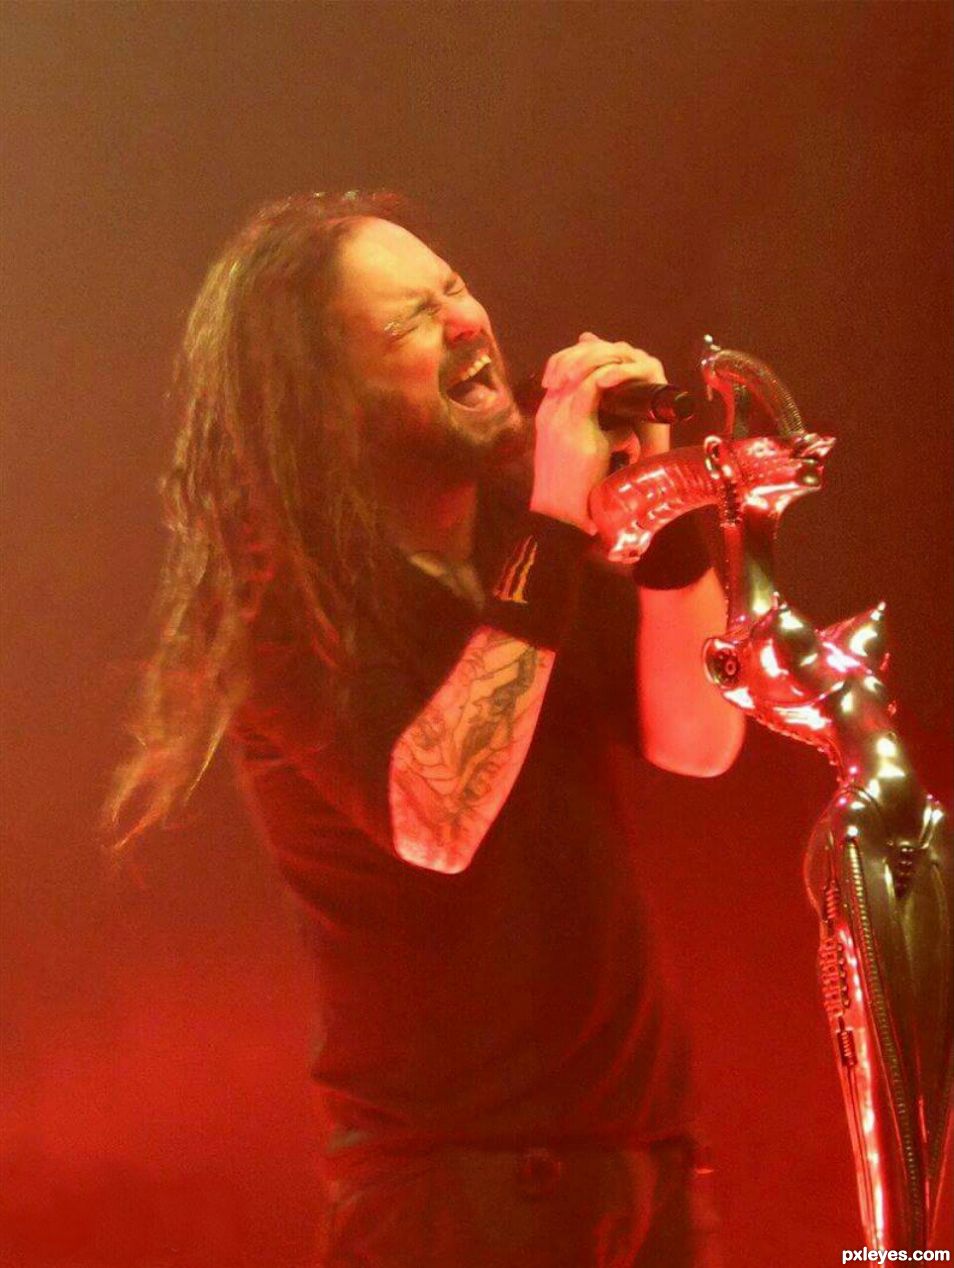 Jonathan Davis rocking it out on stage!